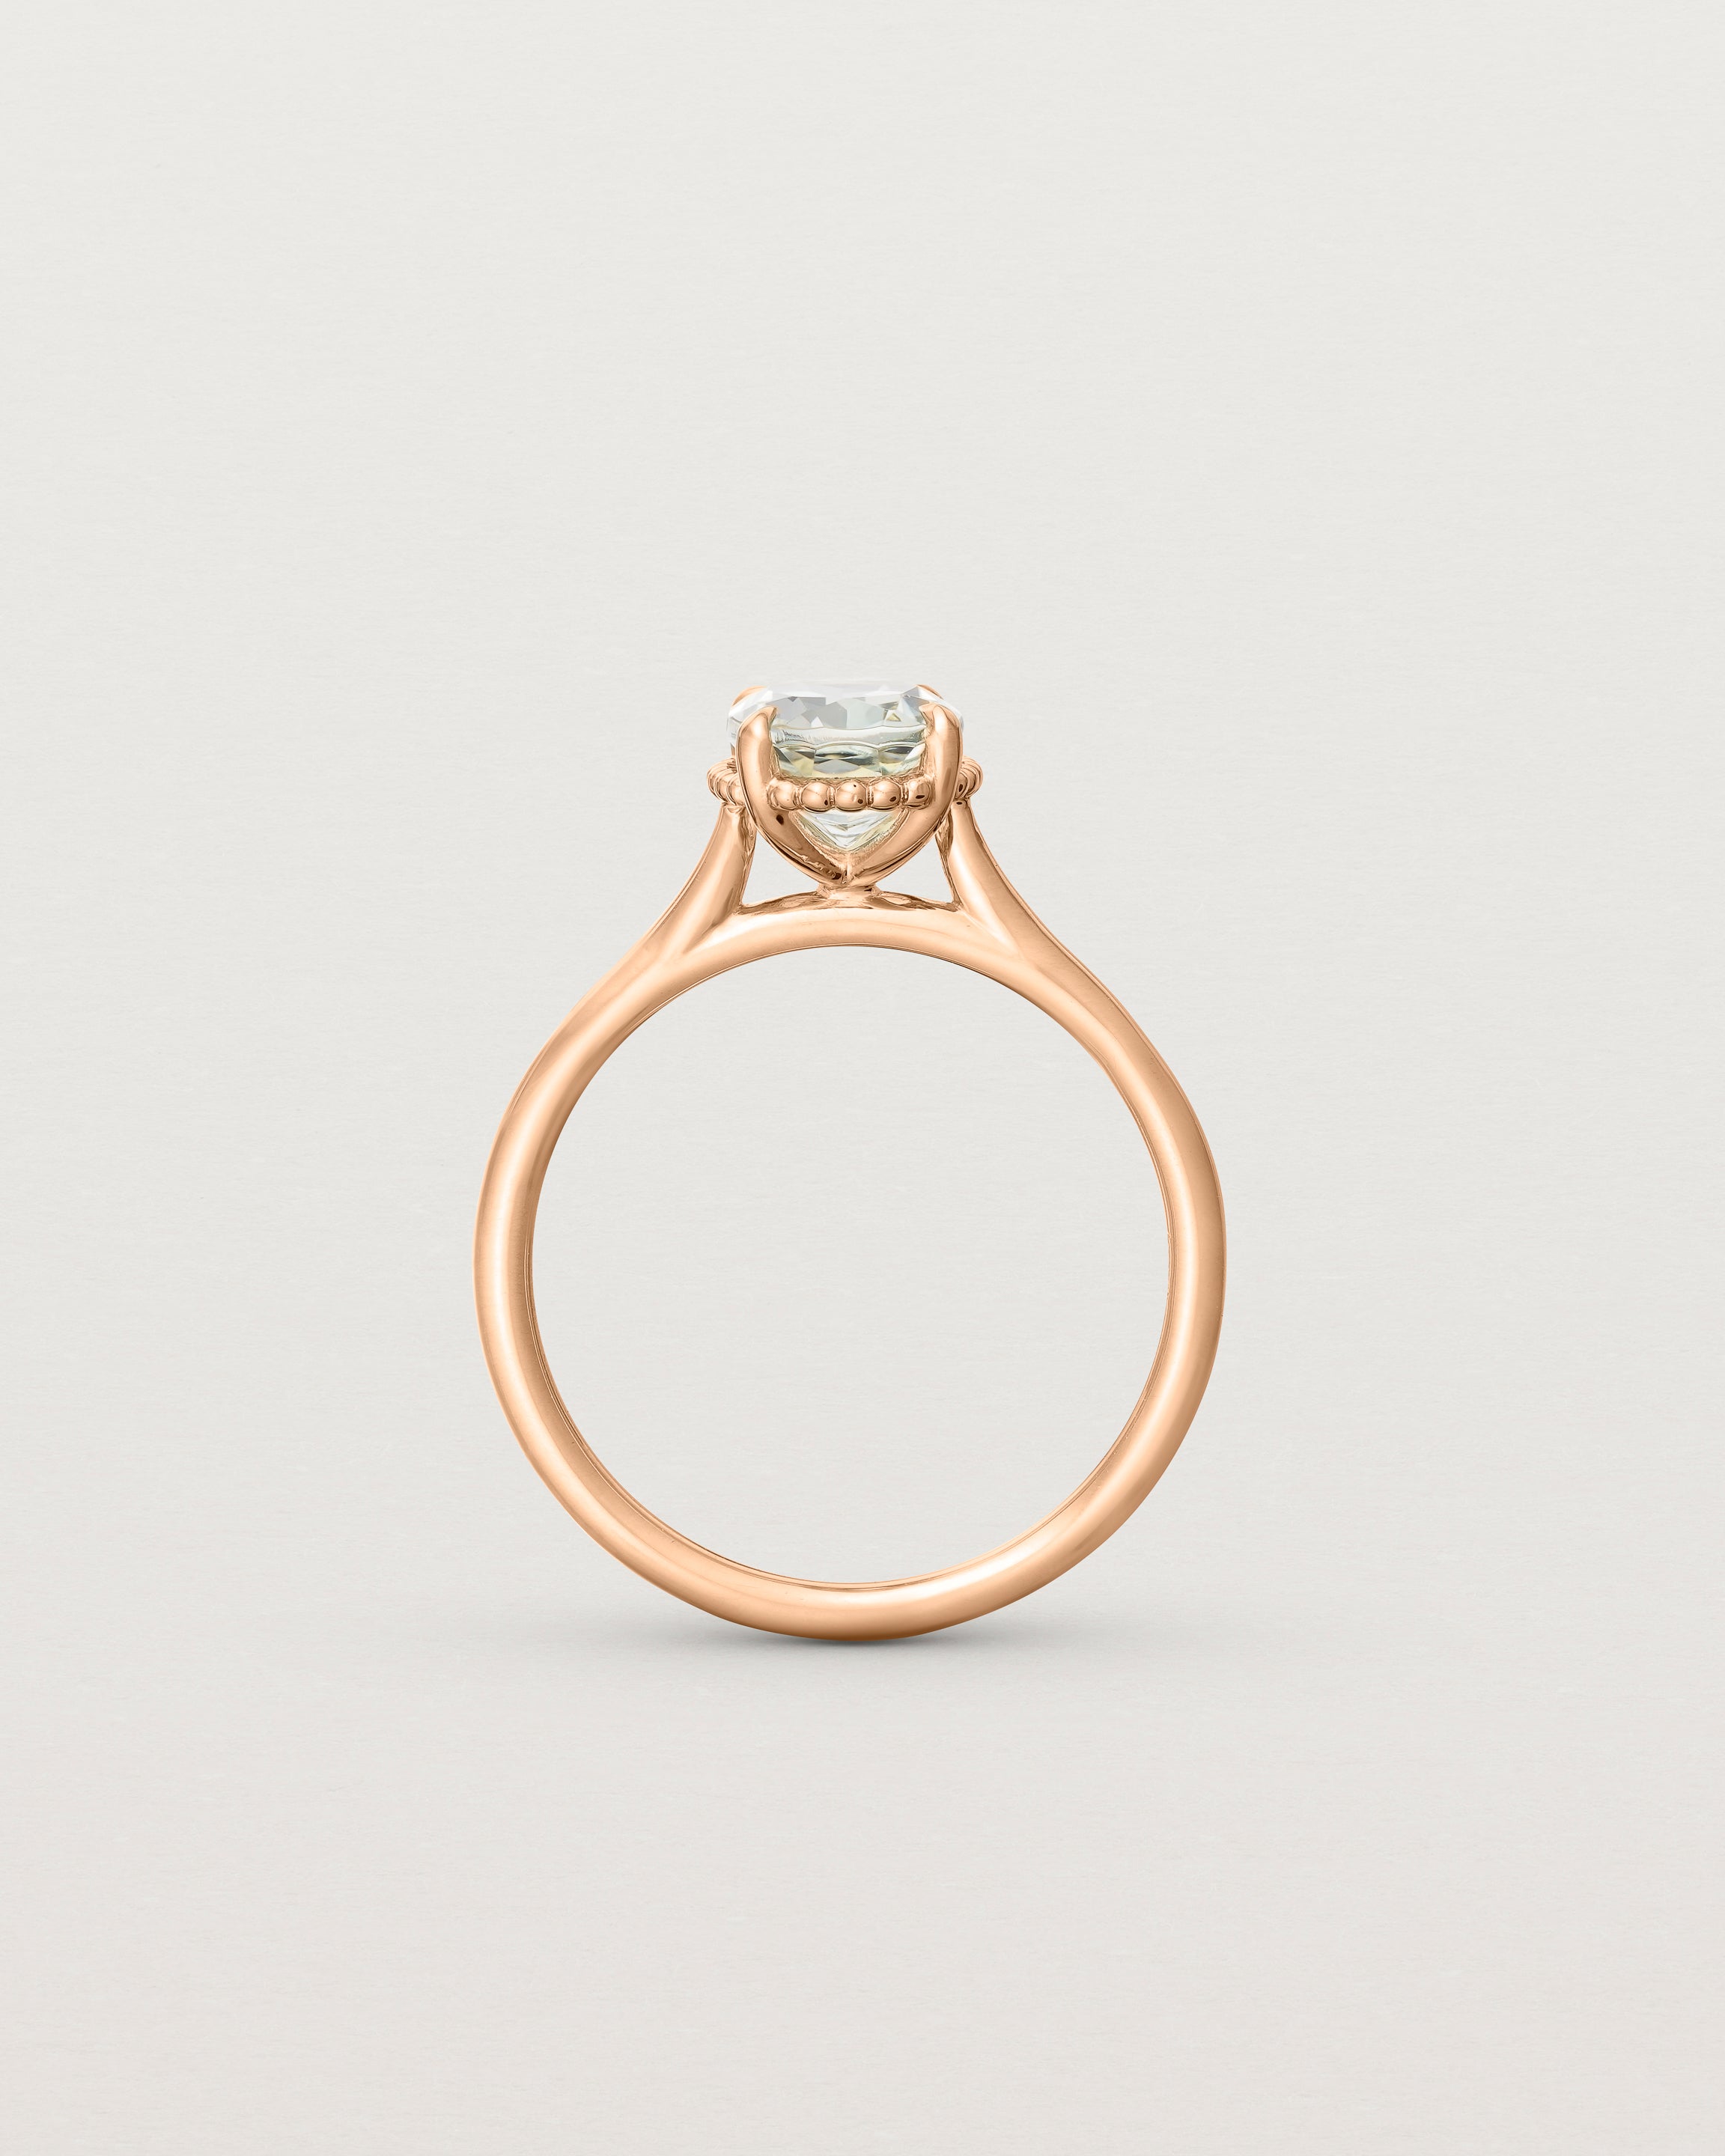 Standing view of the Thea Oval Solitaire | Green Amethyst in rose gold.